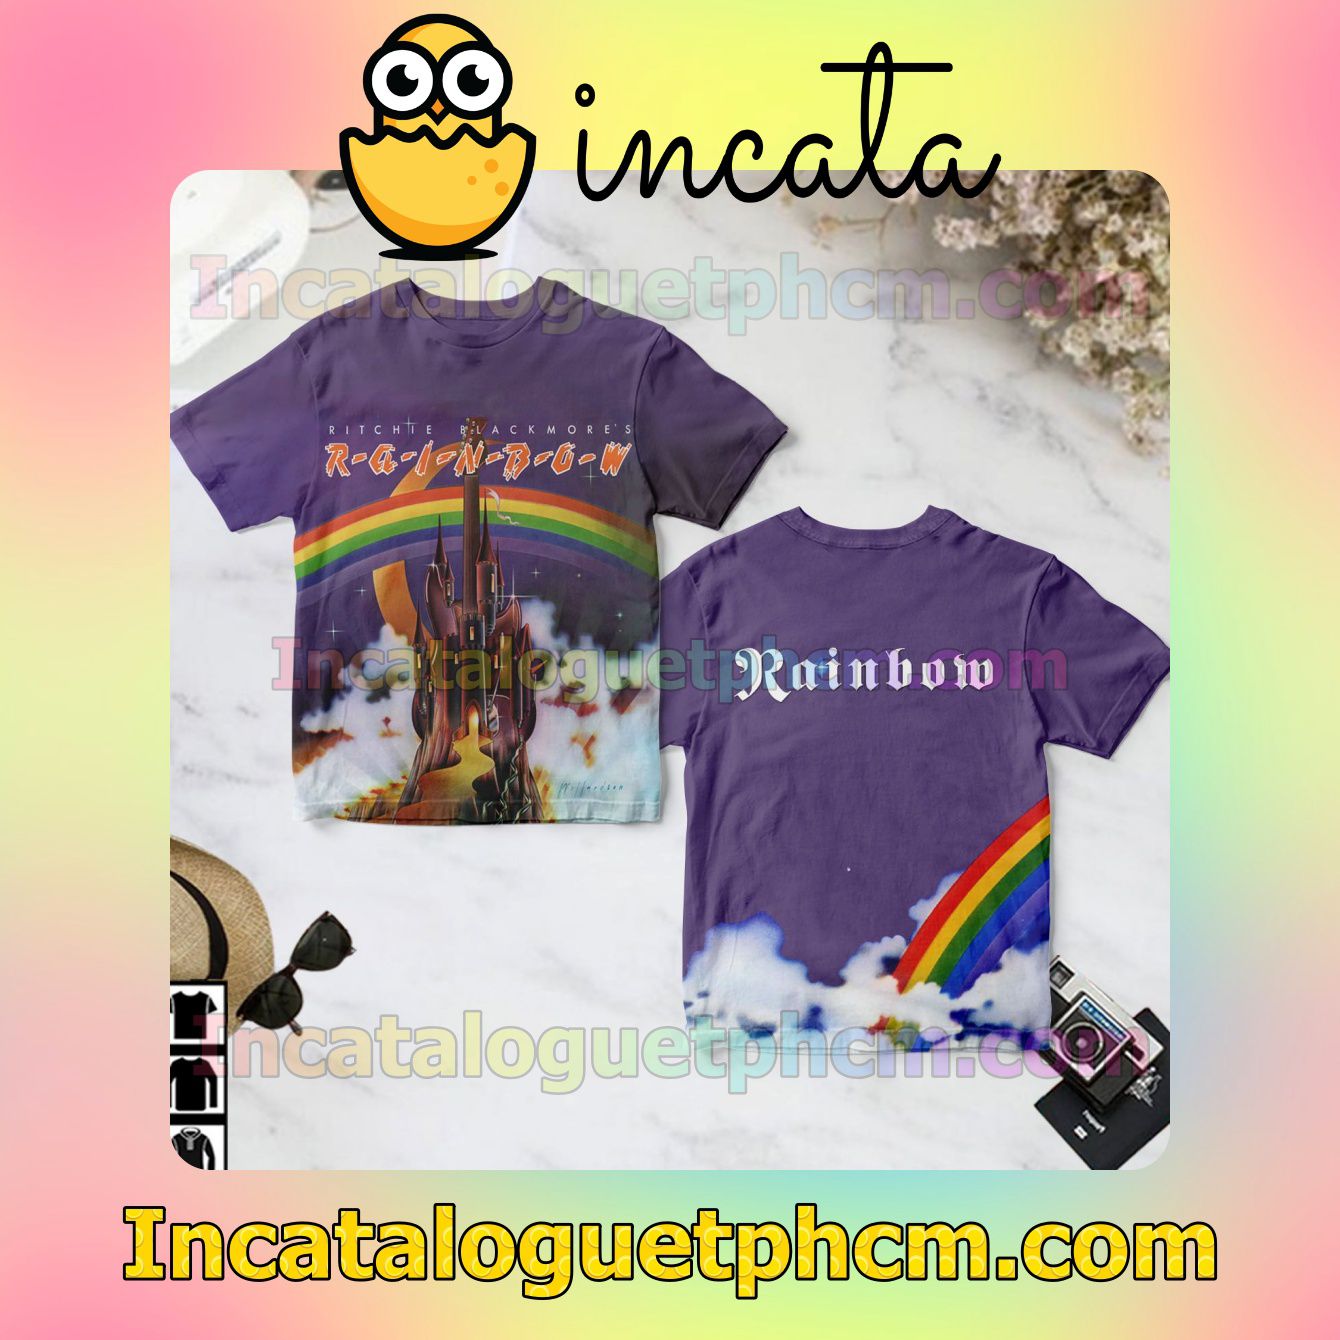 Ritchie Blackmore's Rainbow Debut Album Cover Fan Gift Shirt